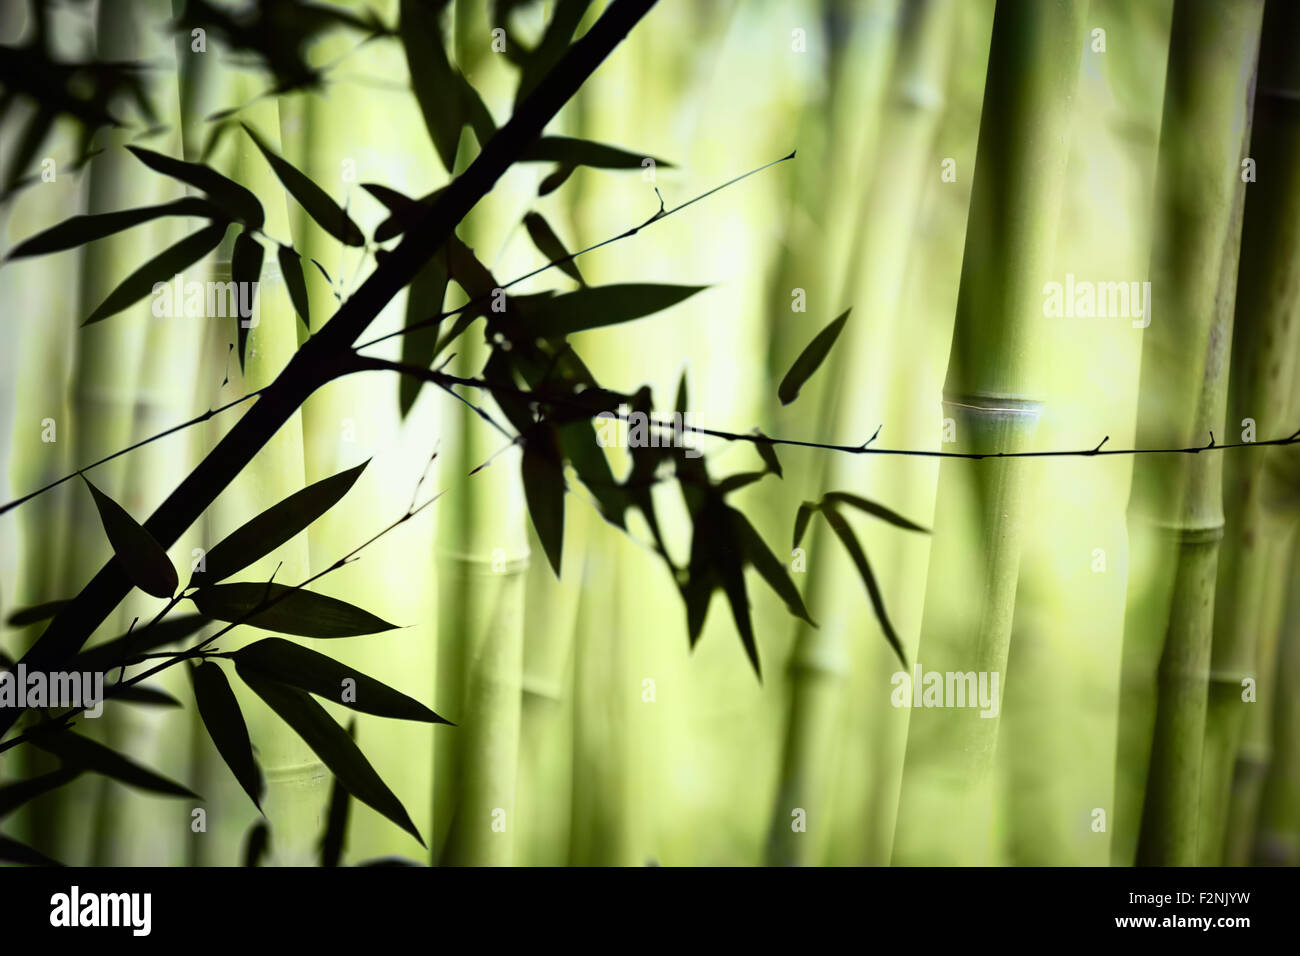 Asian Bamboo forest Stock Photo